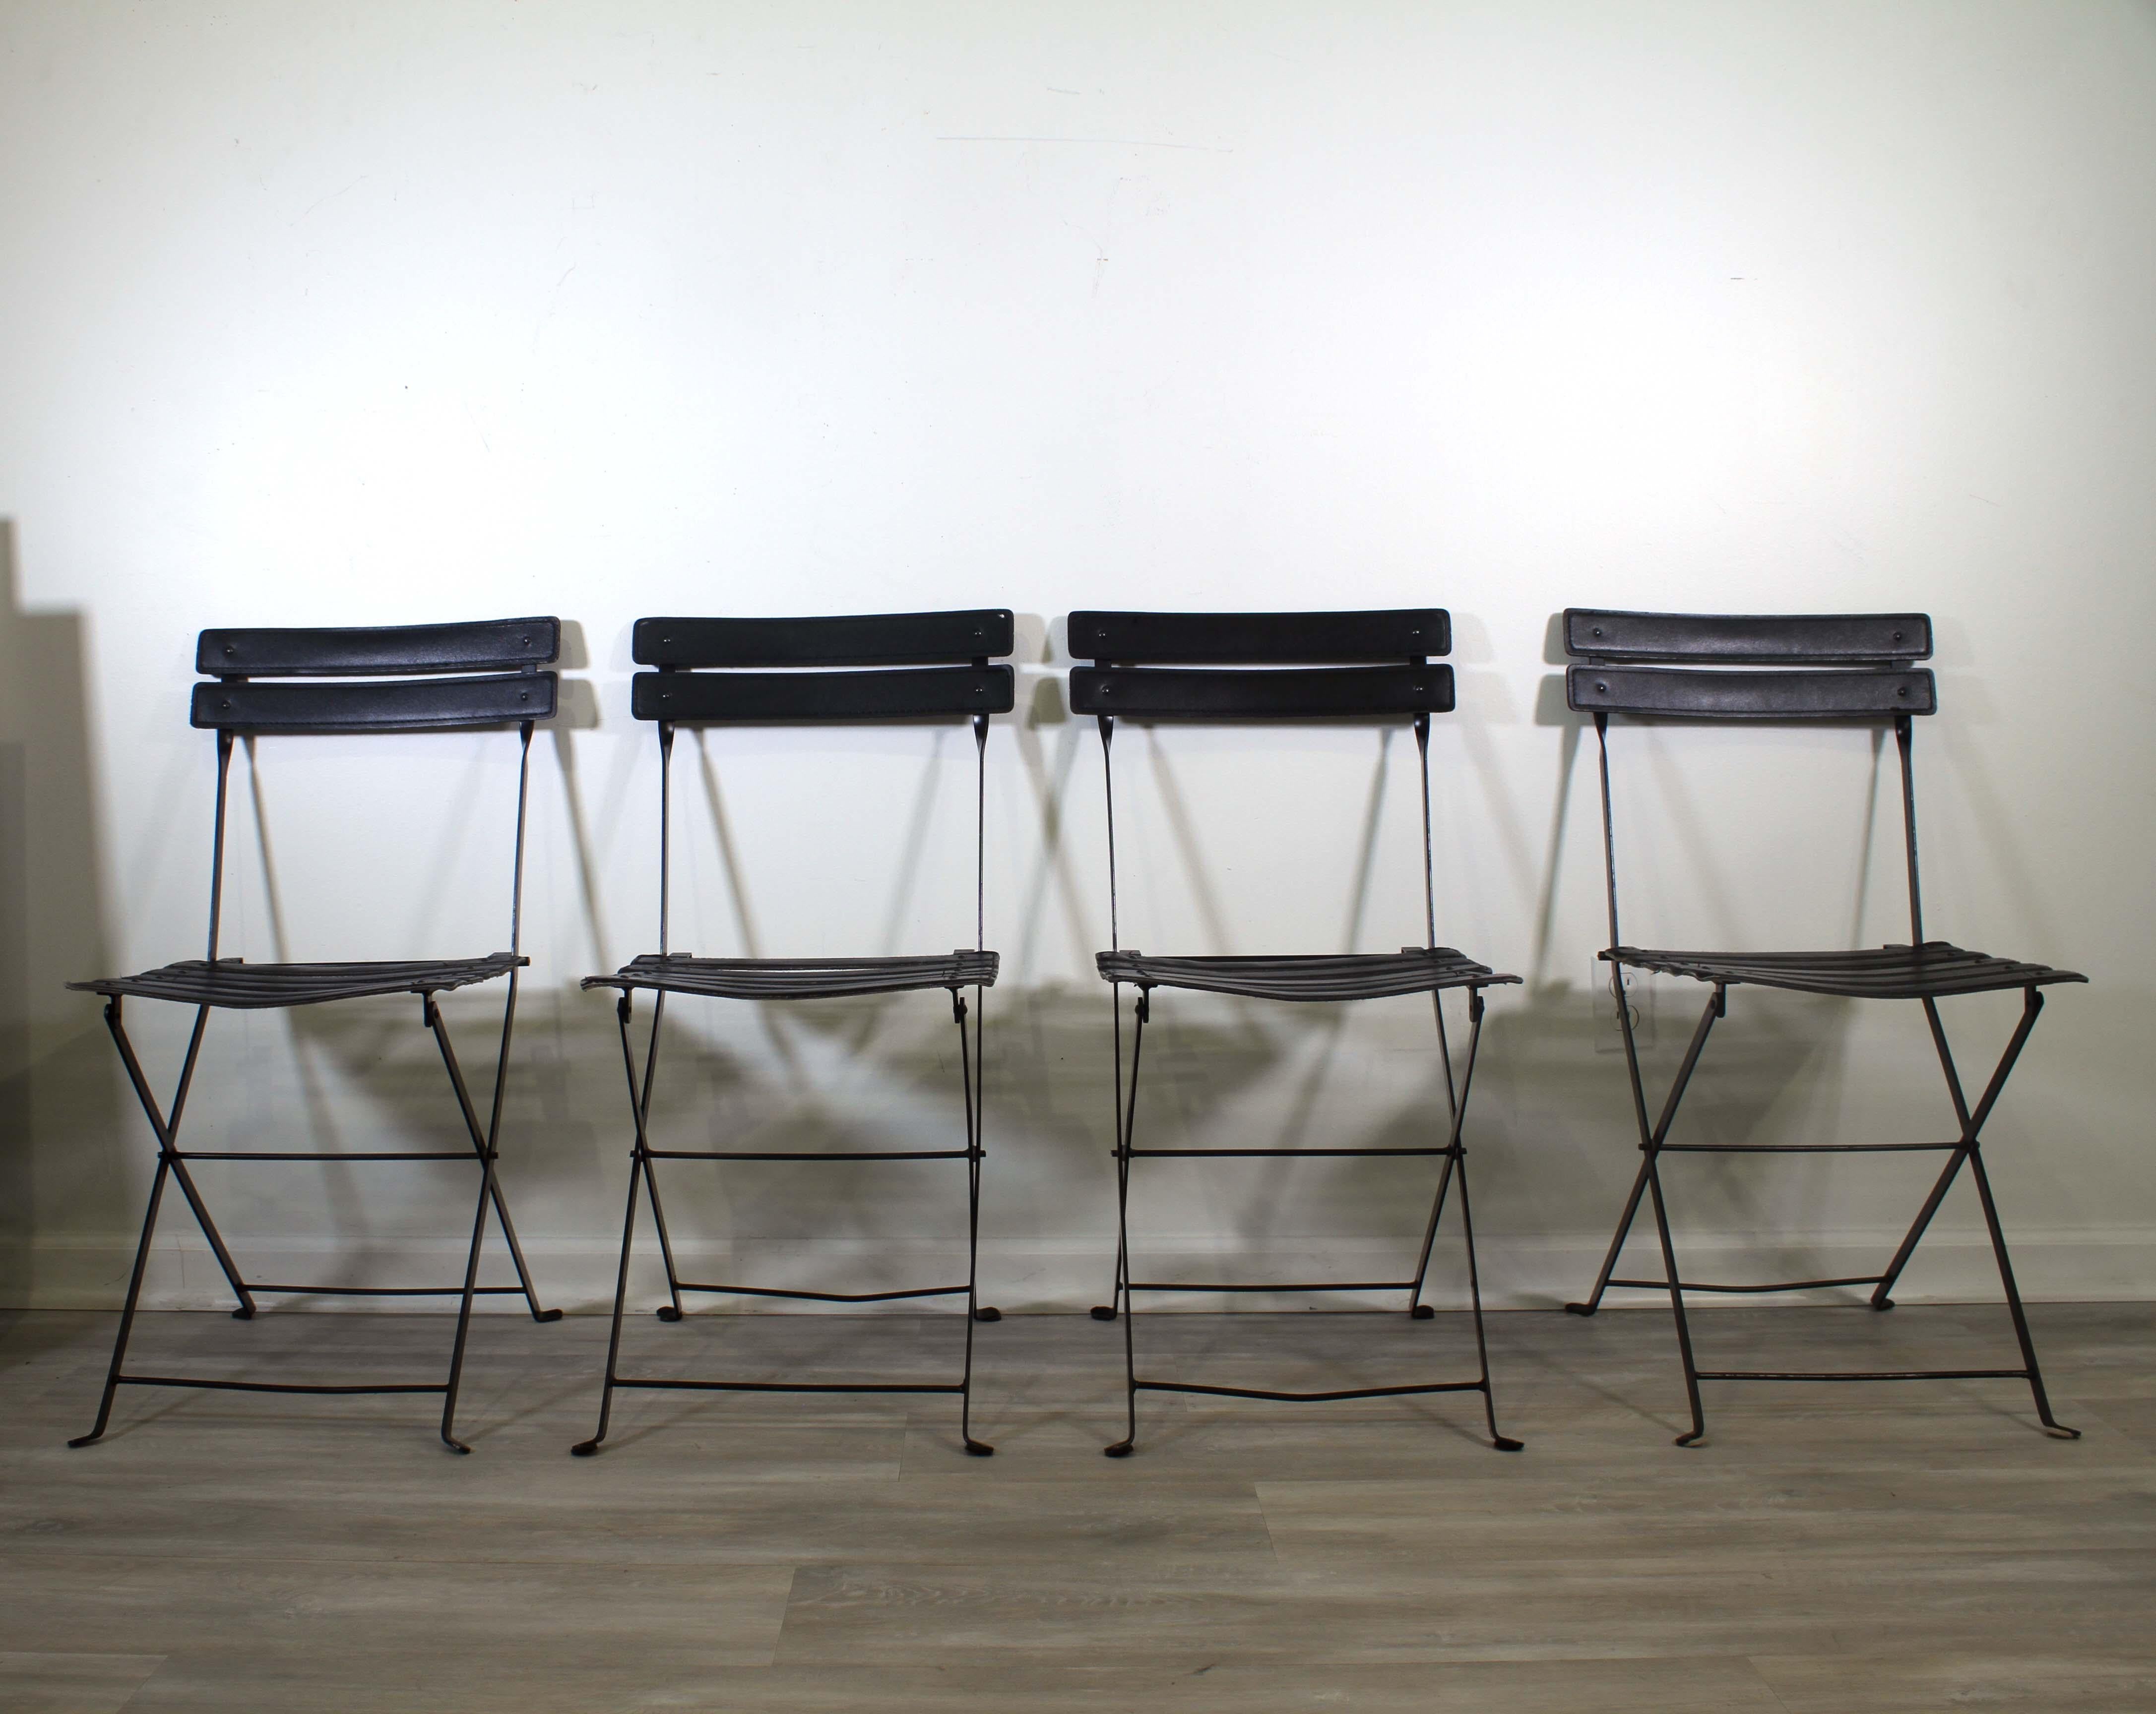 An iconic set of 4 folding chairs with a black steel frame with black leather banding by Marco Zanuso for Zanotta Celestina. Italy 1970s. A fantastic modern interpretation of the folding chair that is sophisticated and stylish. From a private